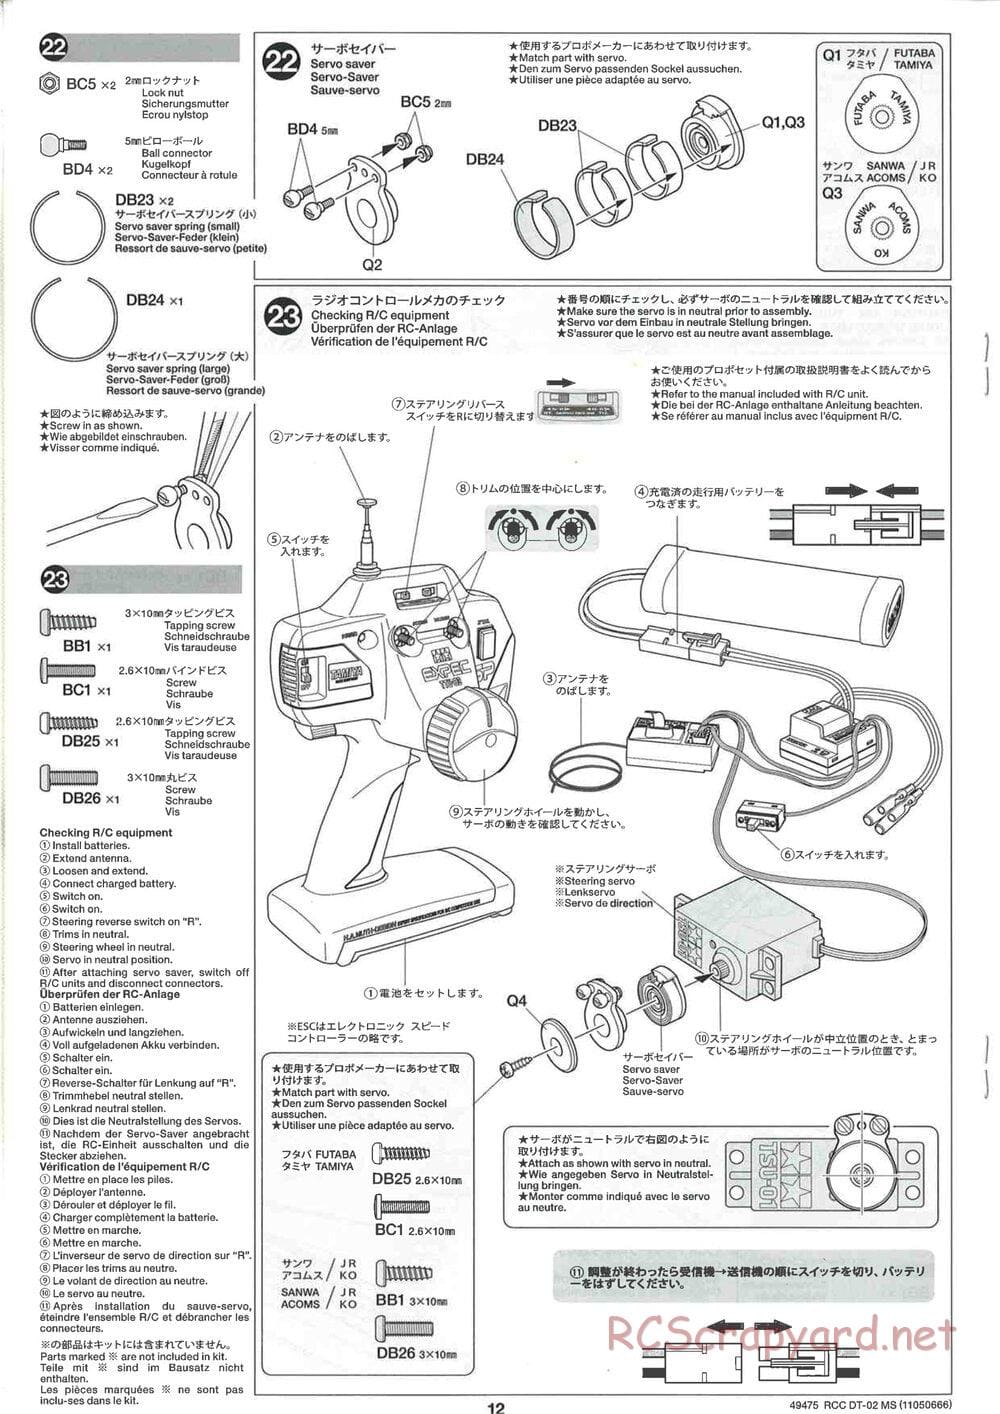 Tamiya - DT-02 MS Chassis - Manual - Page 13